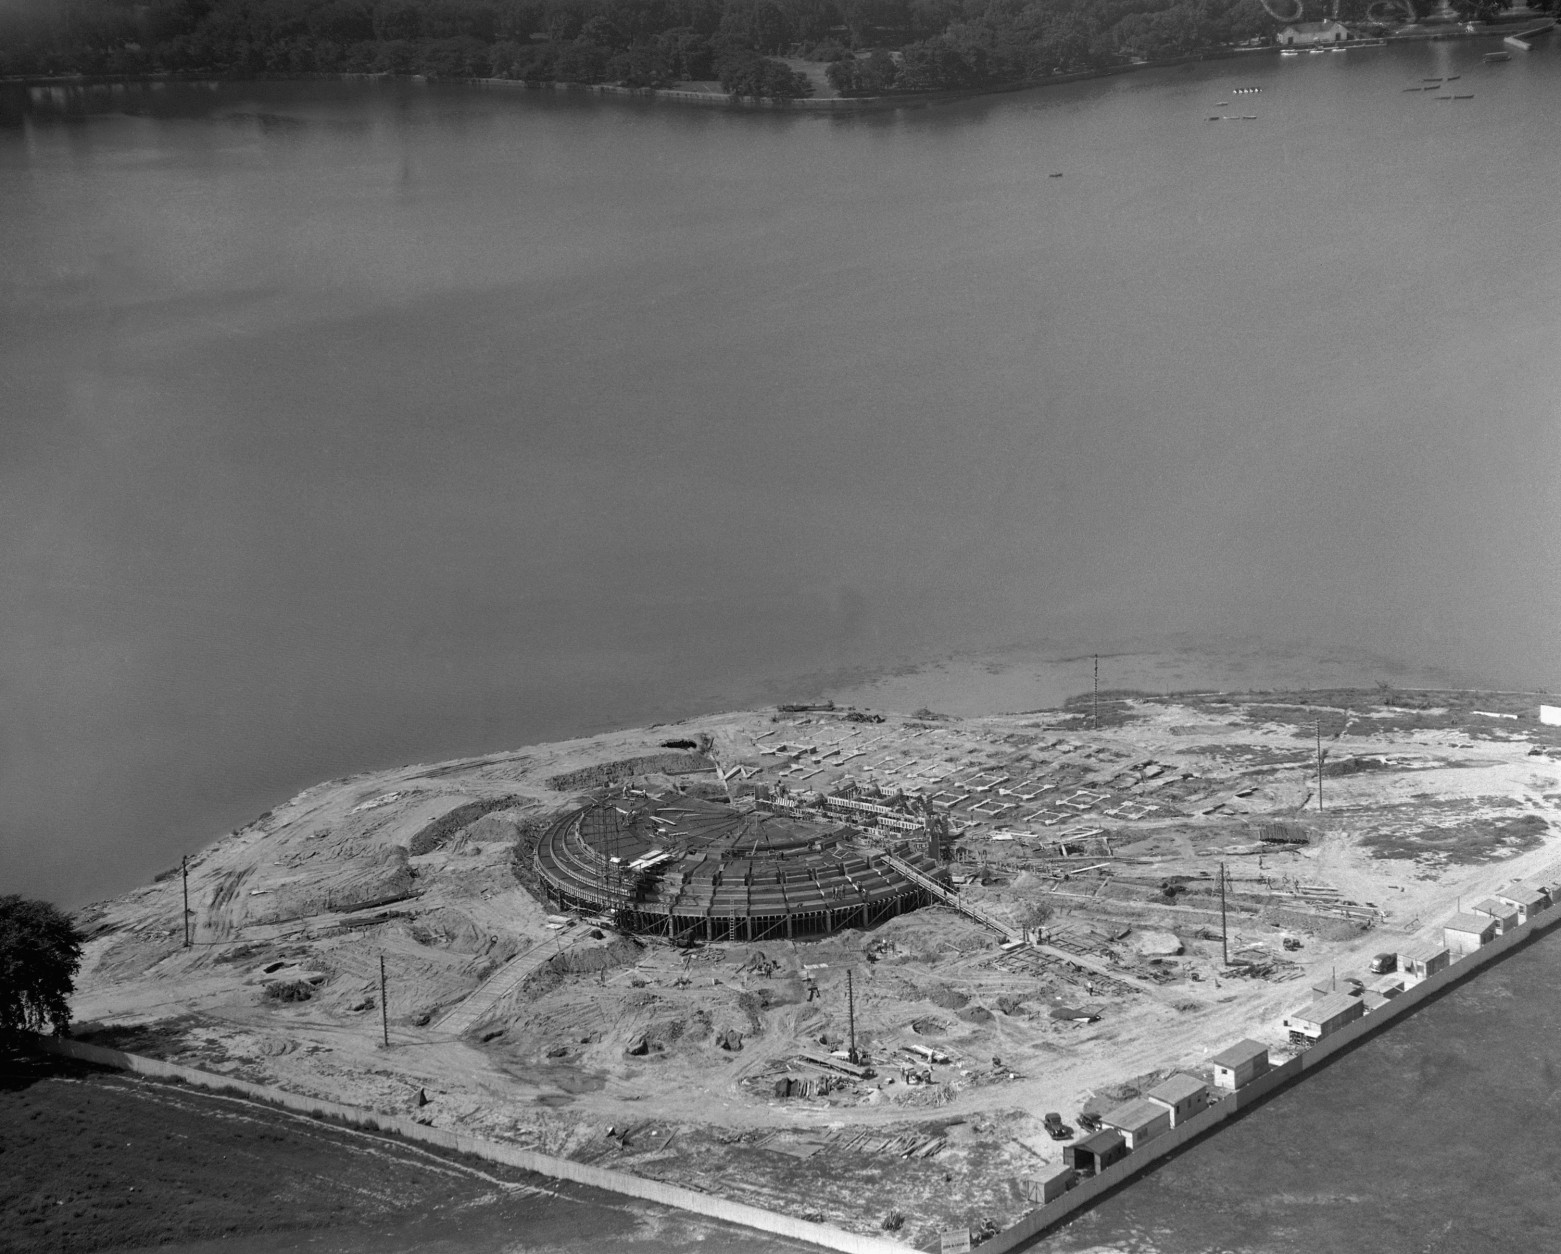 Jefferson Memorial in Washington, D.C. shown under construction Aug. 24, 1939. Tidal Basin is shown in the background. (AP Photo)